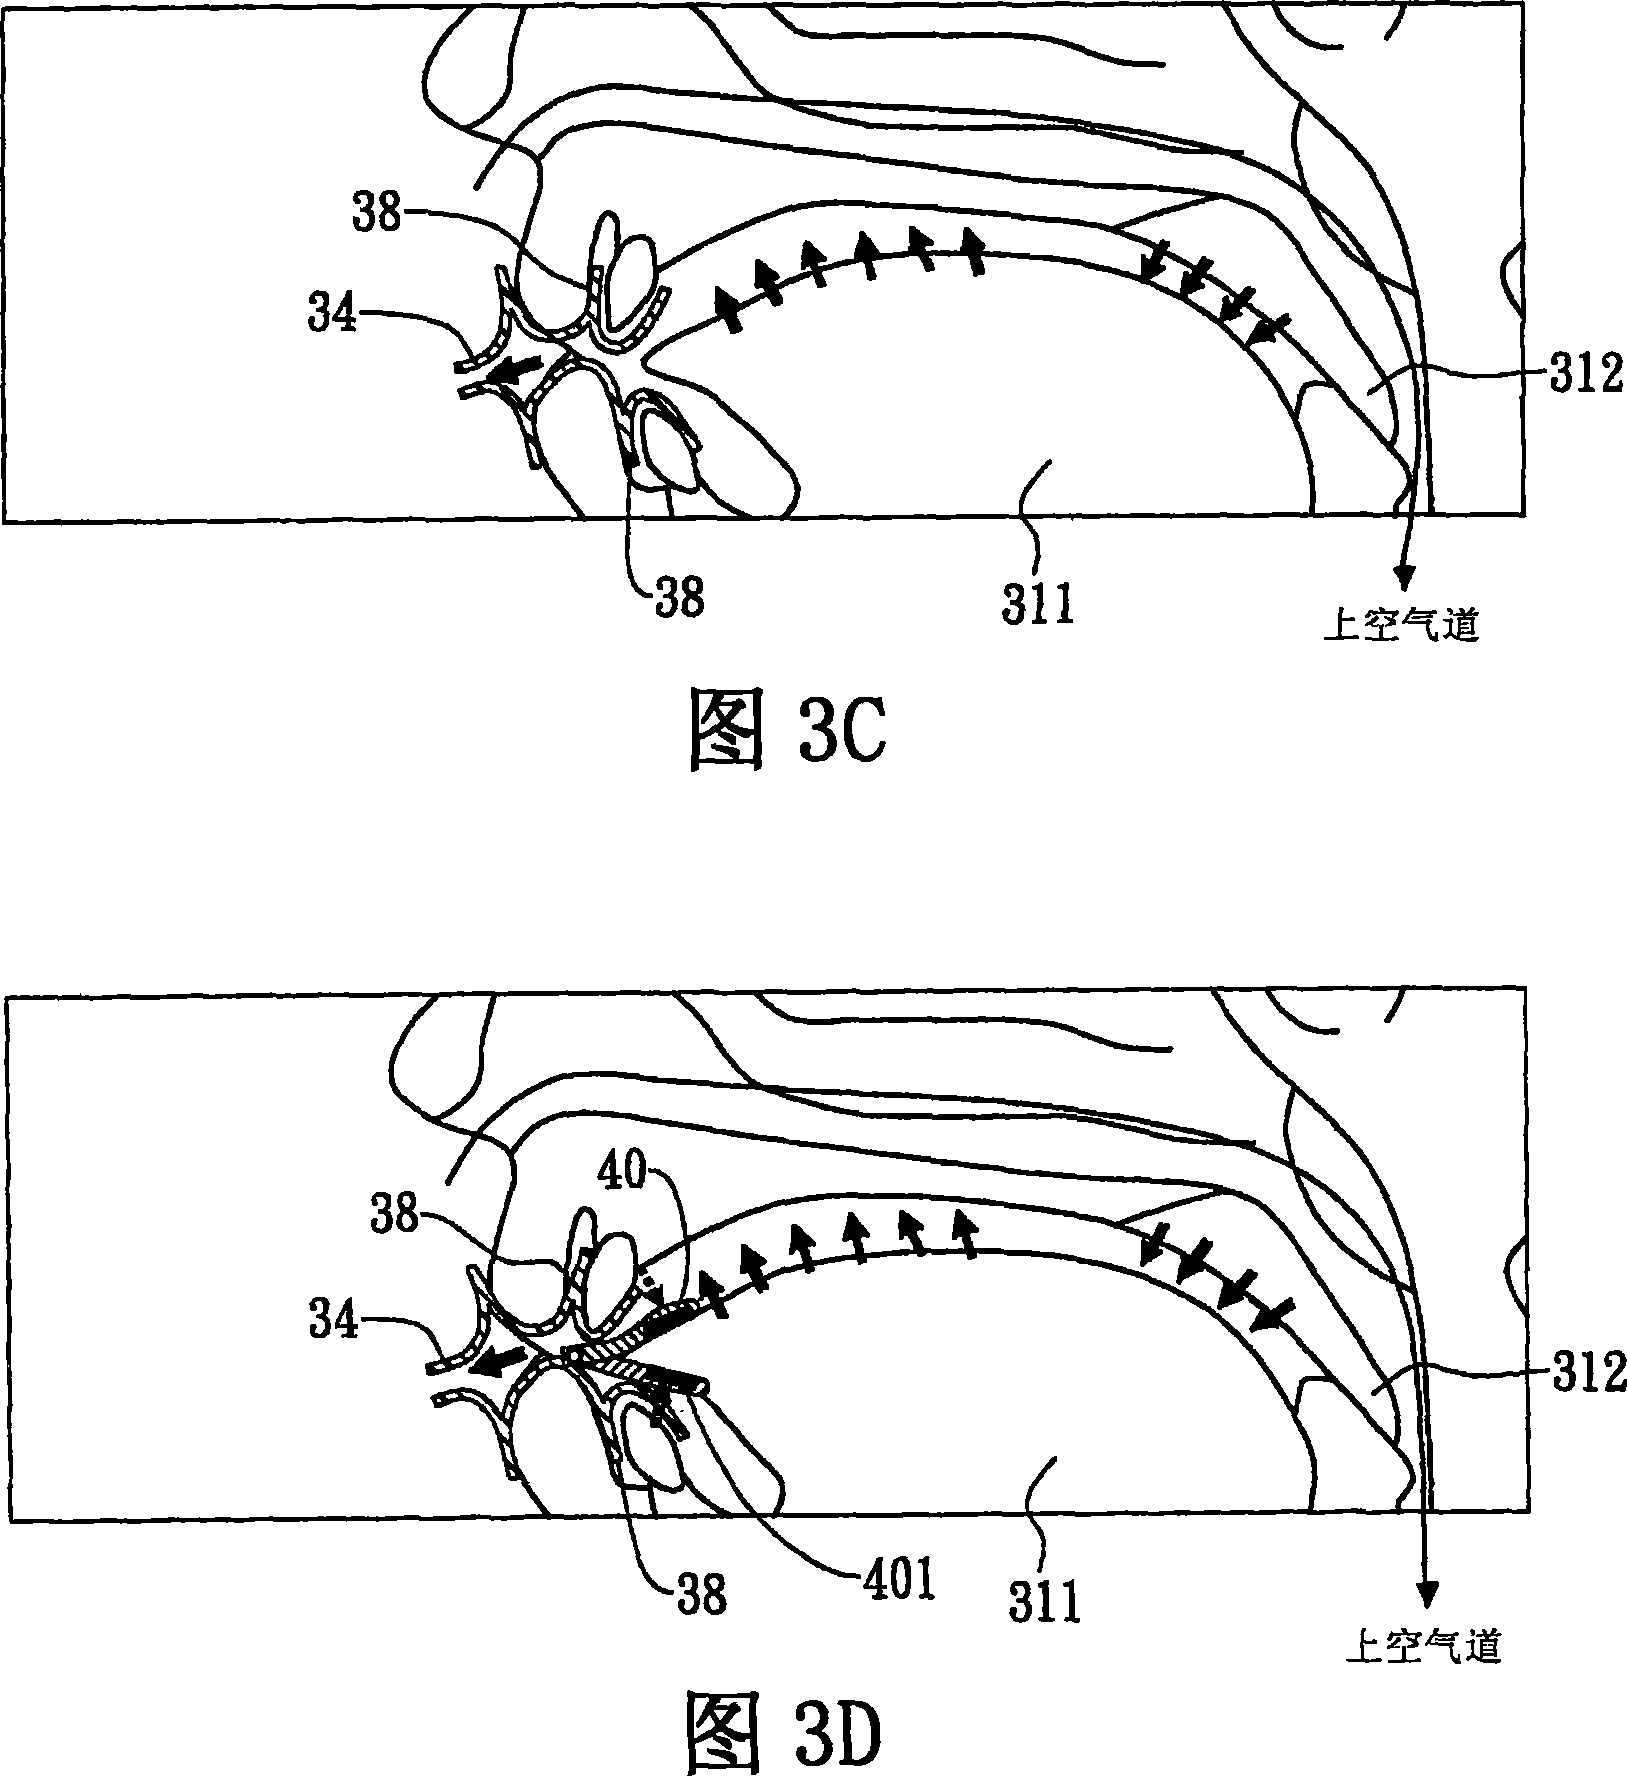 Method and device for treating patients with obstructive sleep apnea by applying negative pressure in oral cavity to patient